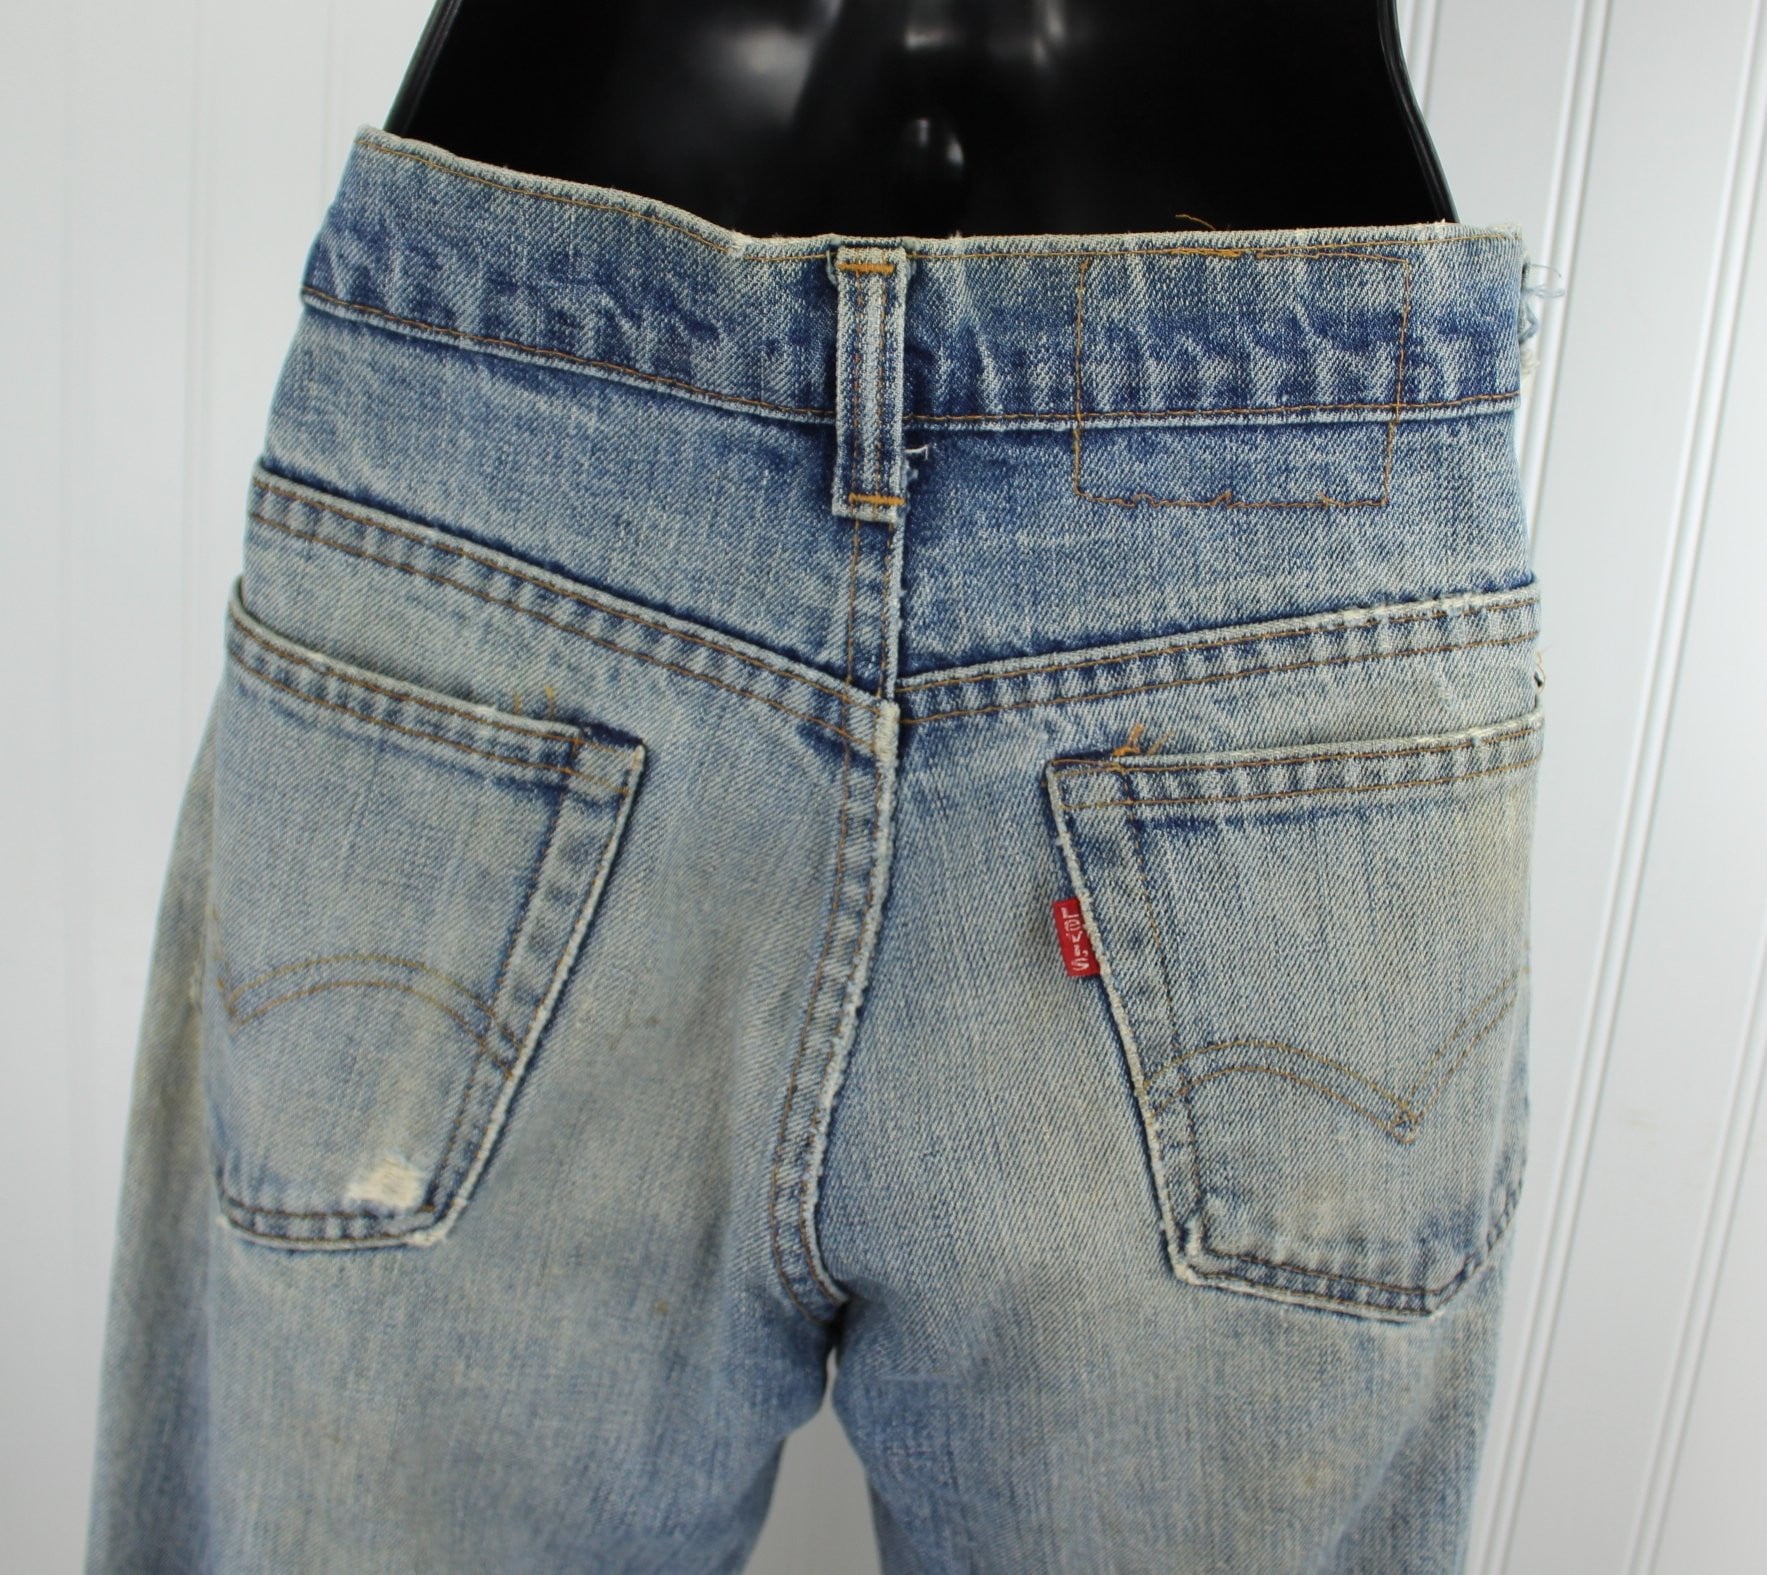 Vintage Levi's Skate Boarder Distressed Grunge  Jeans - Early 1990s - Waist 29" Red Tab moderate distress